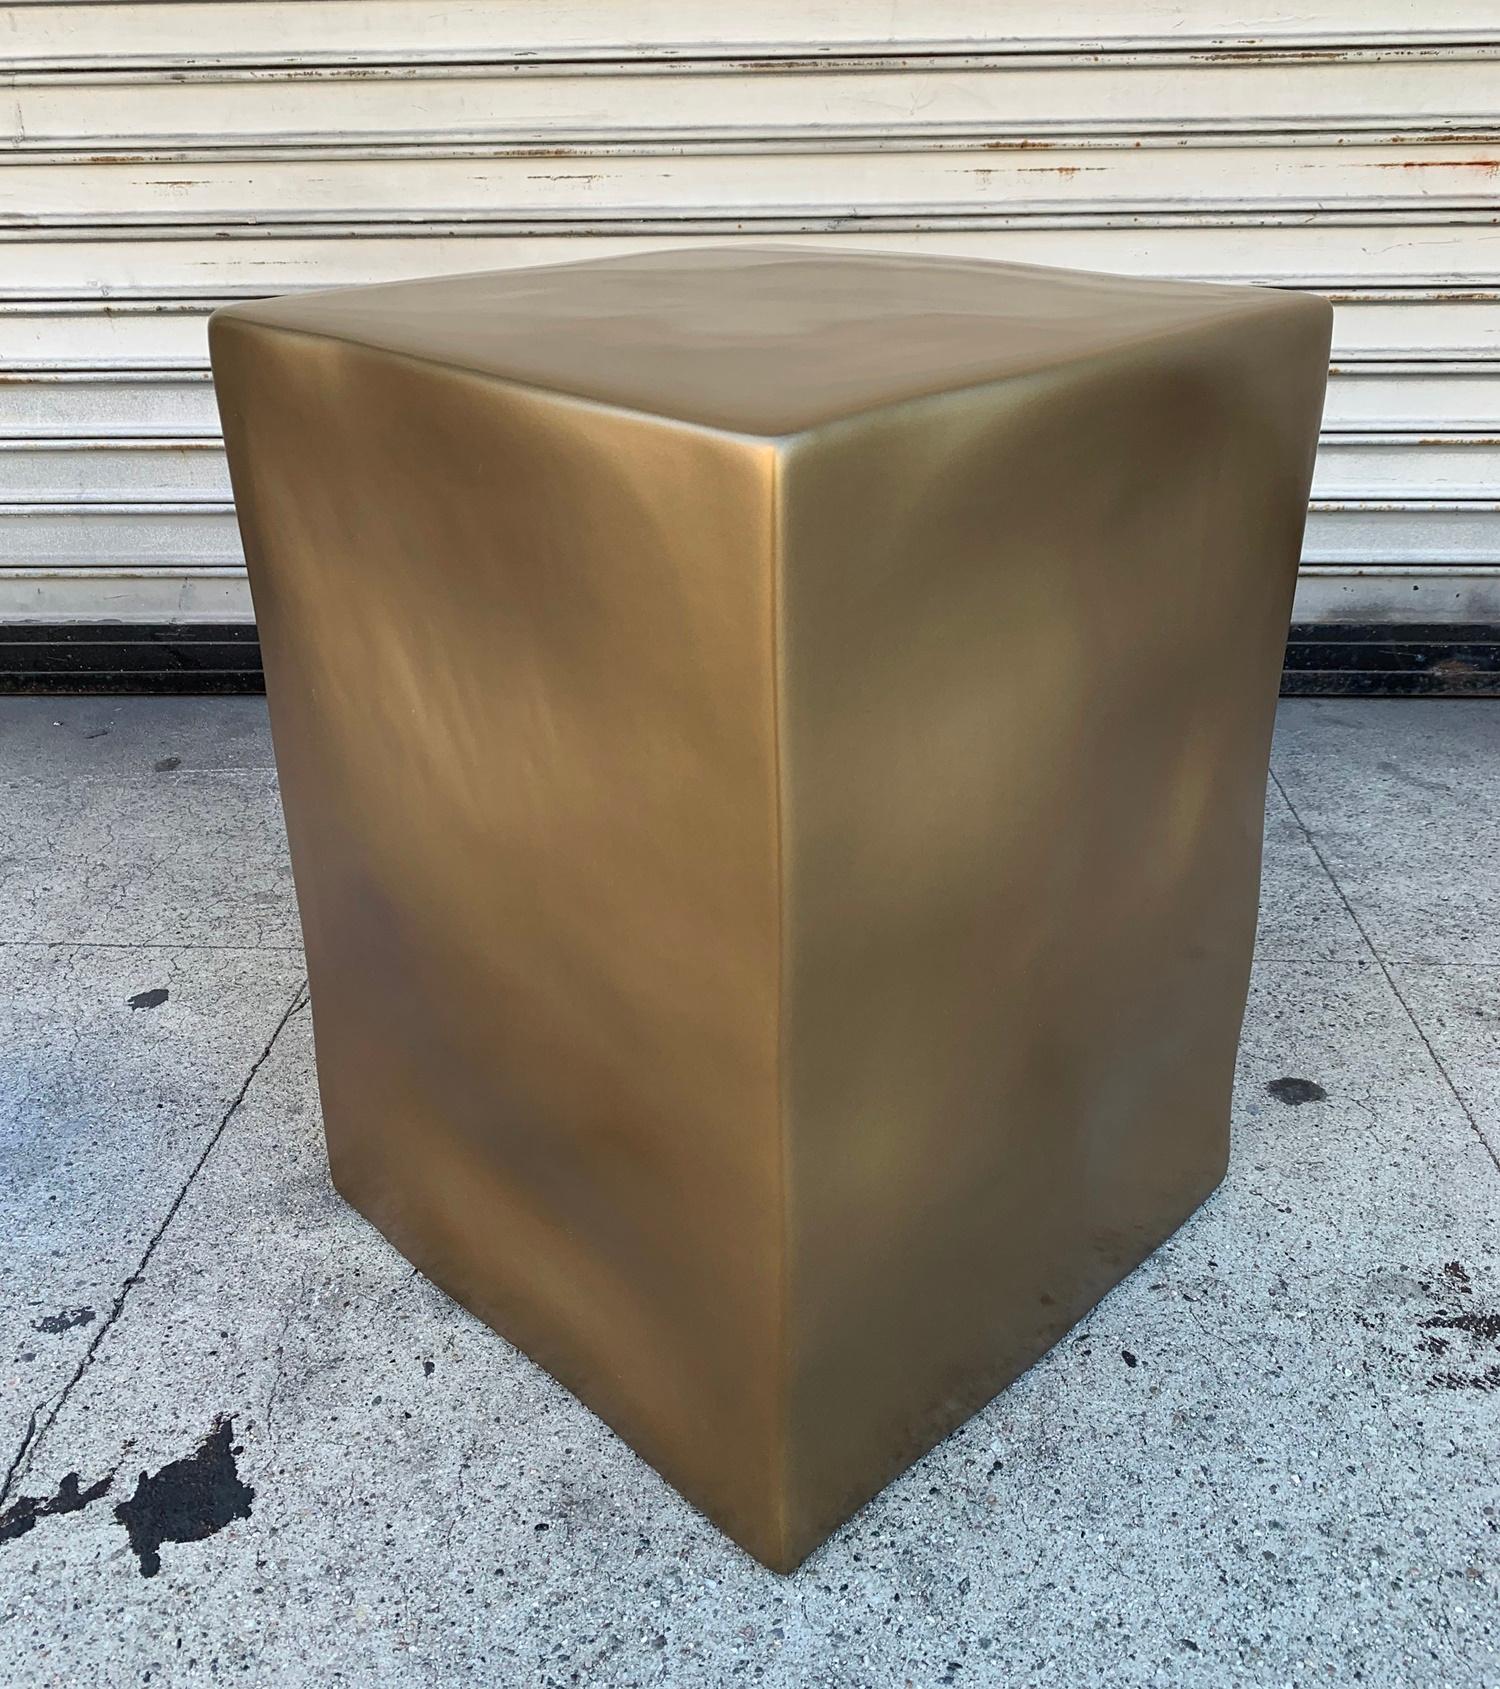 Philippe Starck “Mr Knorr” XO icon porcelain seat or object d’art, made in France, we have a total of 2 in gold
Available for immediate purchase.
Measures: 20.5” high x 15” wide x 15” deep.
 